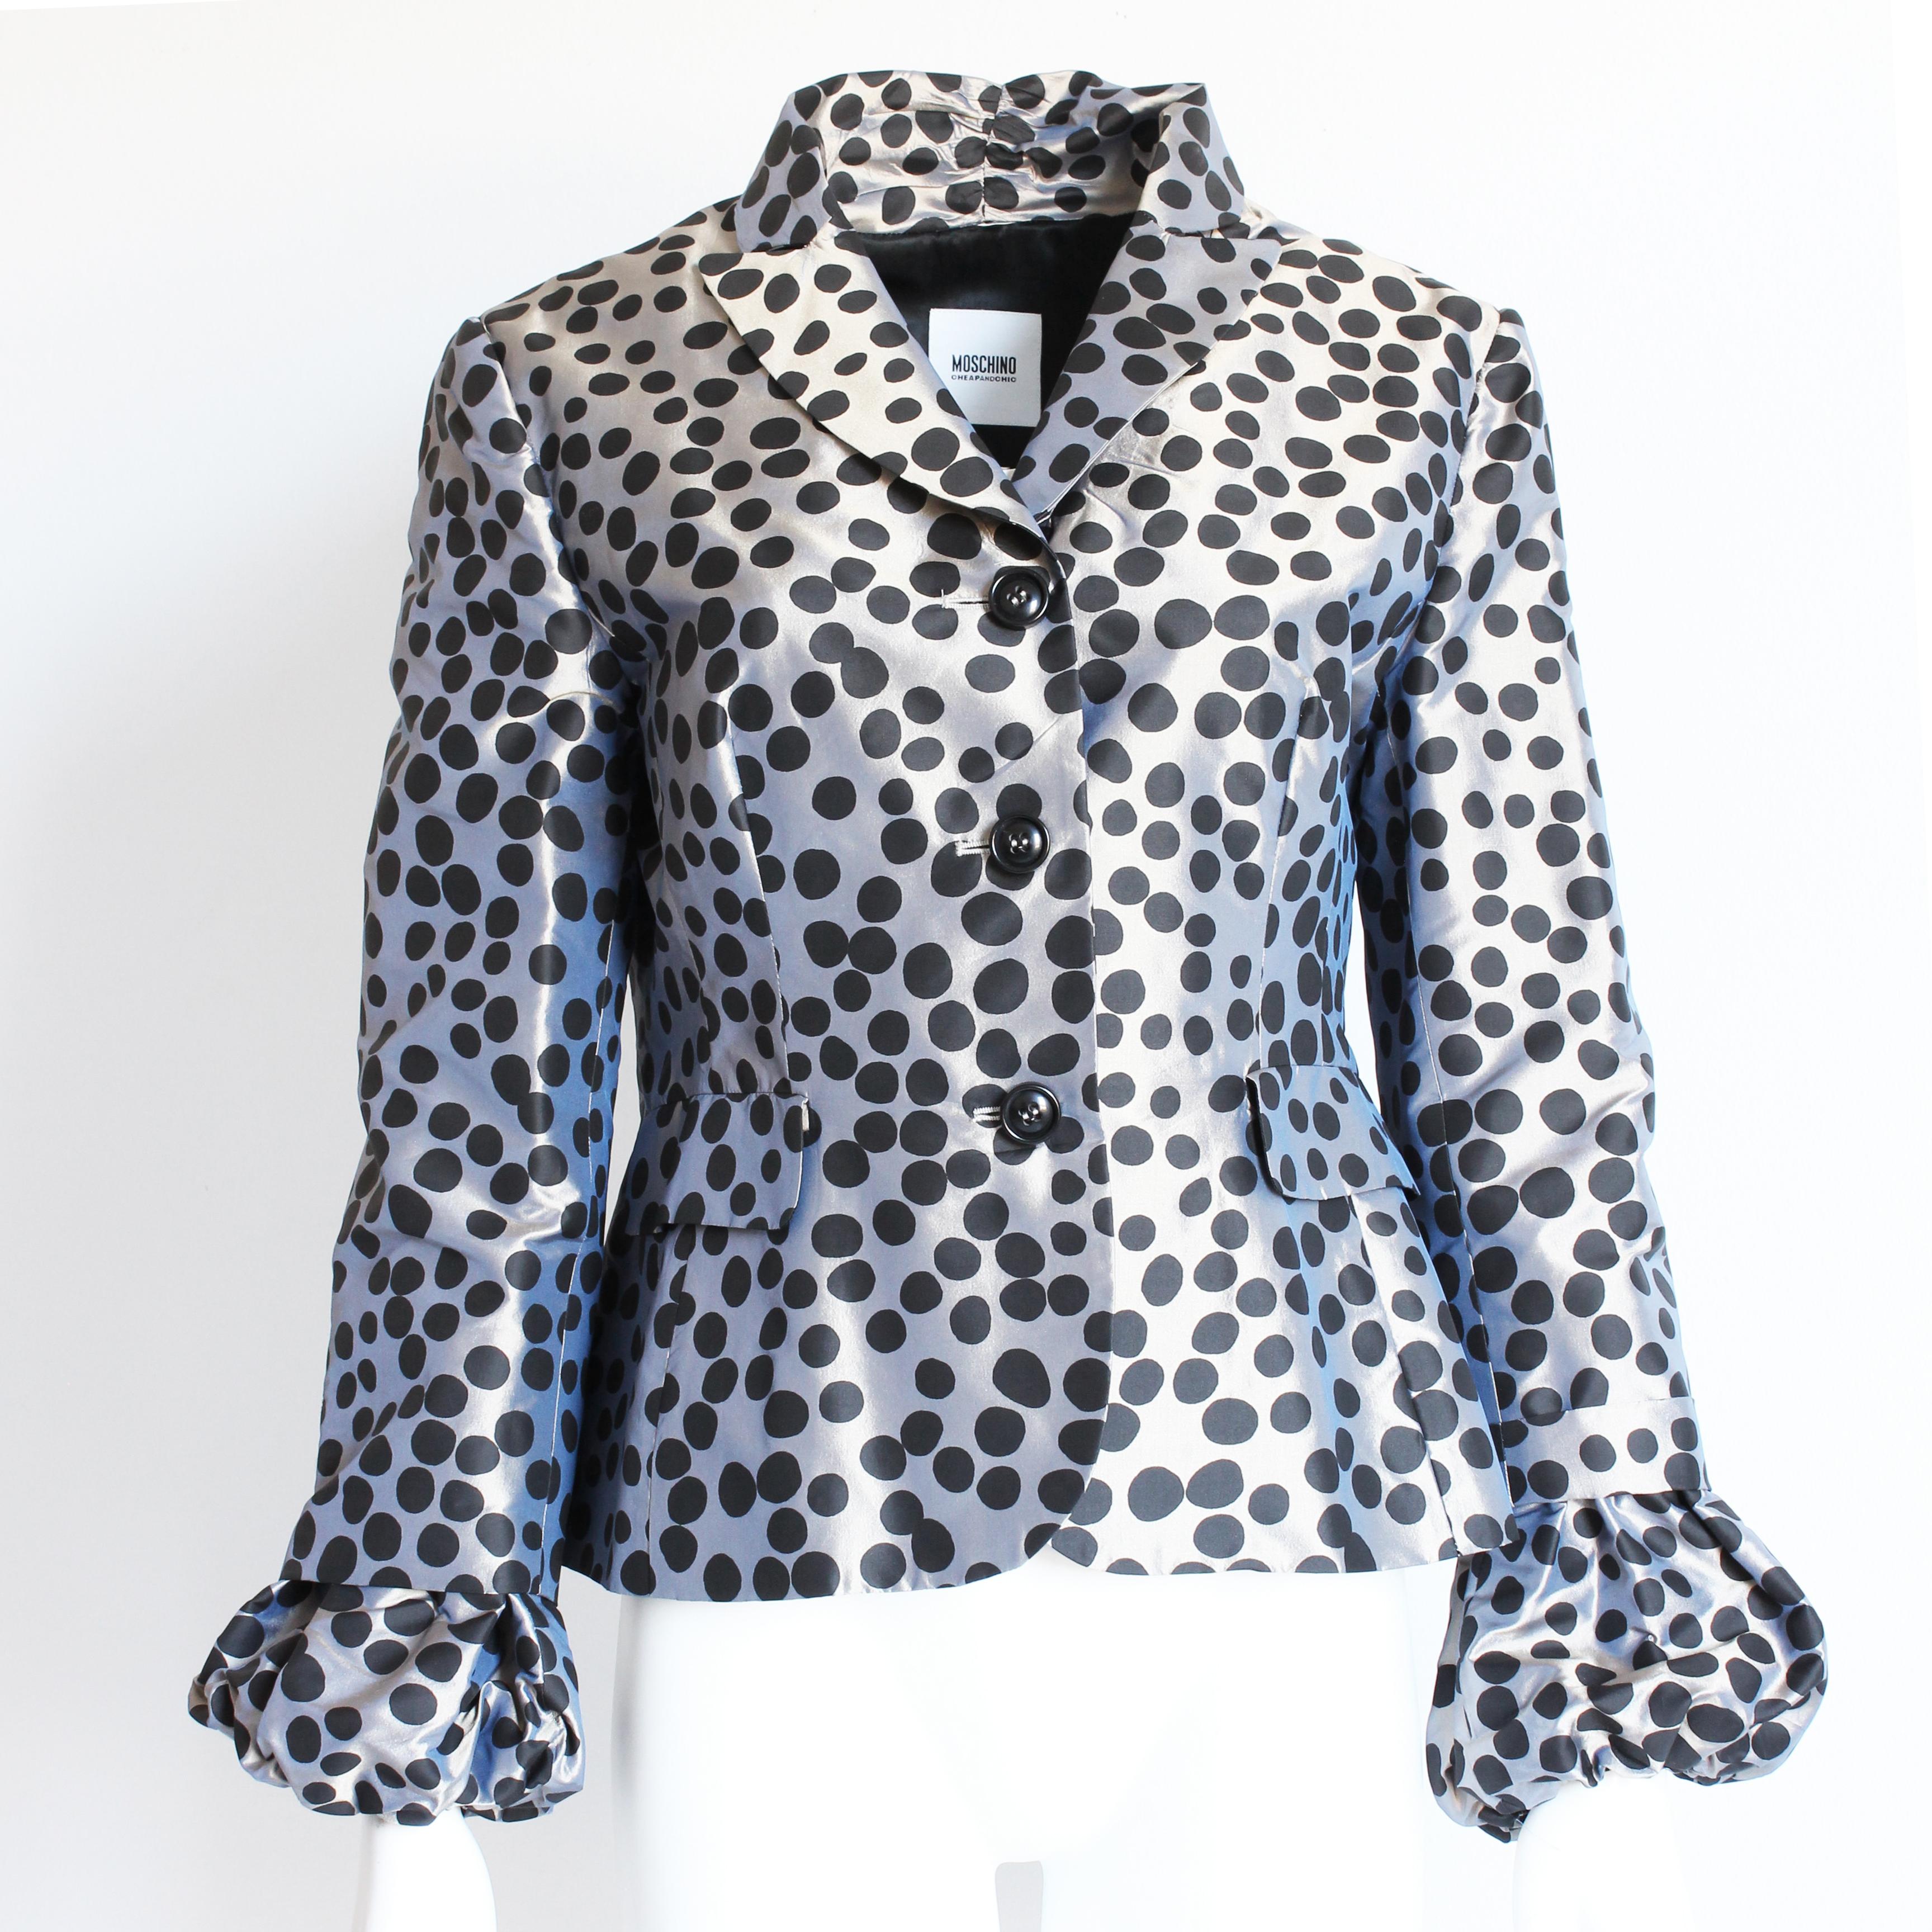 Women's Moschino Jacket Gunmetal Silk with Polka Dots Puff Sleeves Cheap and Chic US 12 For Sale